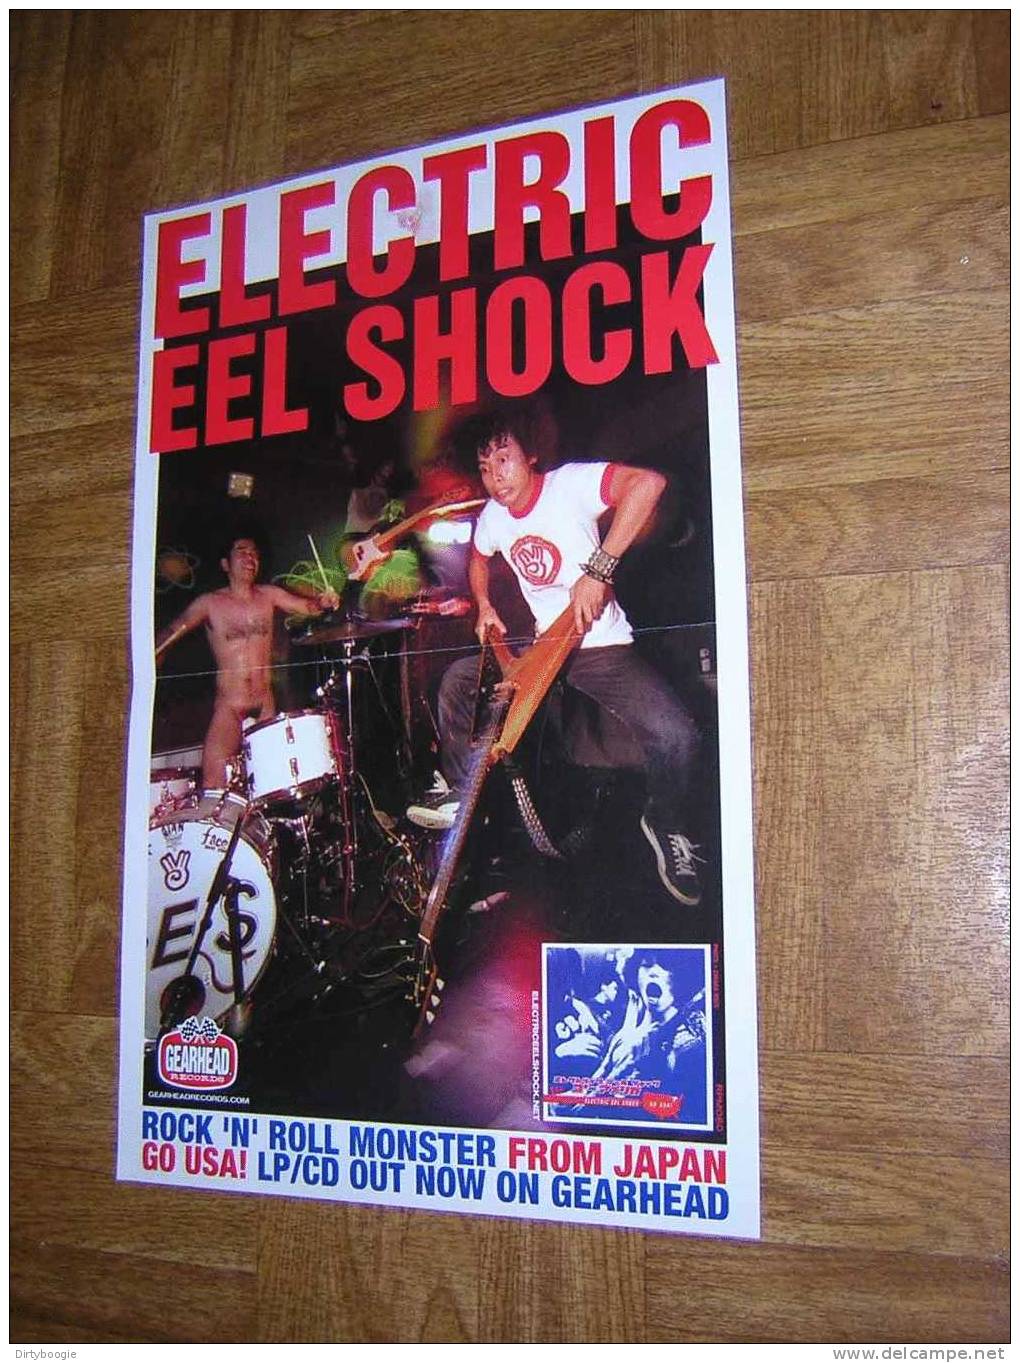 ELECTRIC EEL SHOCK - AFFICHETTE - ROCK'N'ROLL MONSTER FROM JAPAN - GEARHEAD RECORDS - Posters